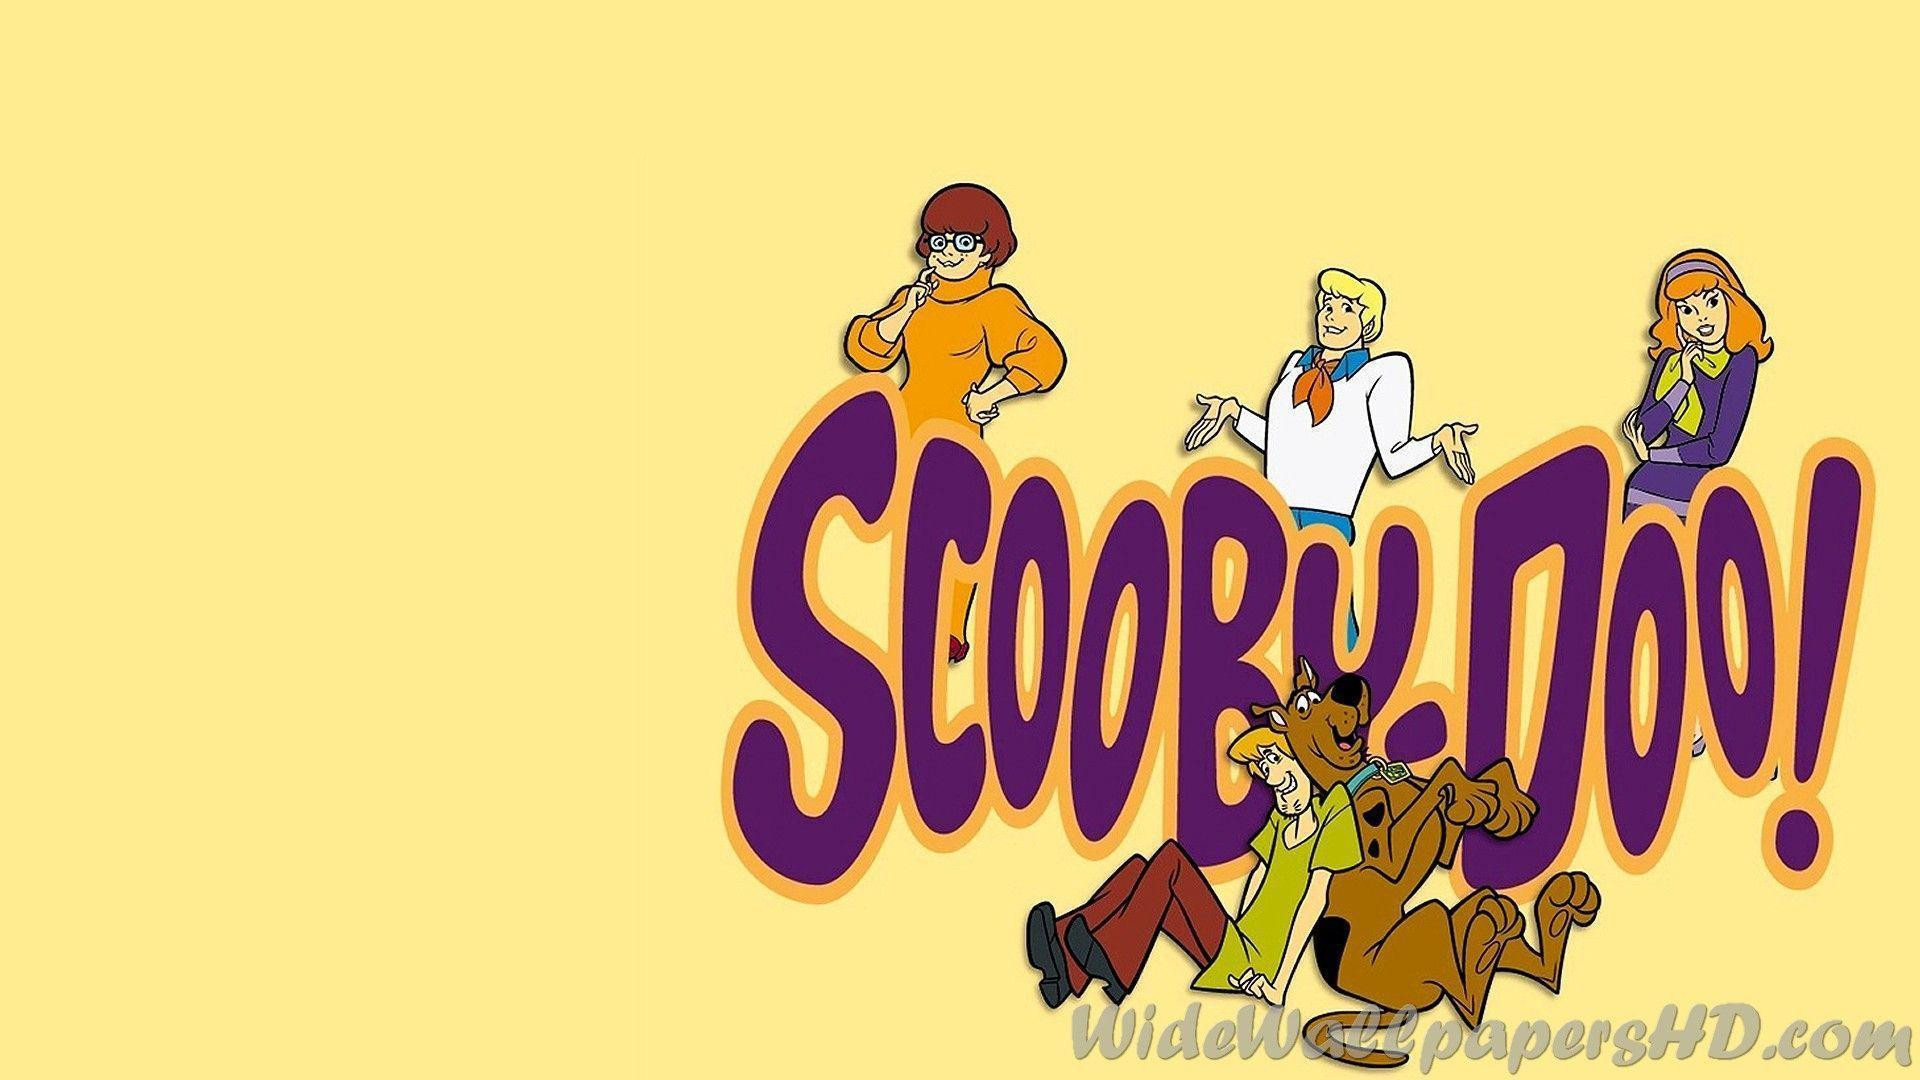 1920x1080 Scooby Doo Wallpaper Awesome Scooby Doo Wallpapers Wallpaper Cave